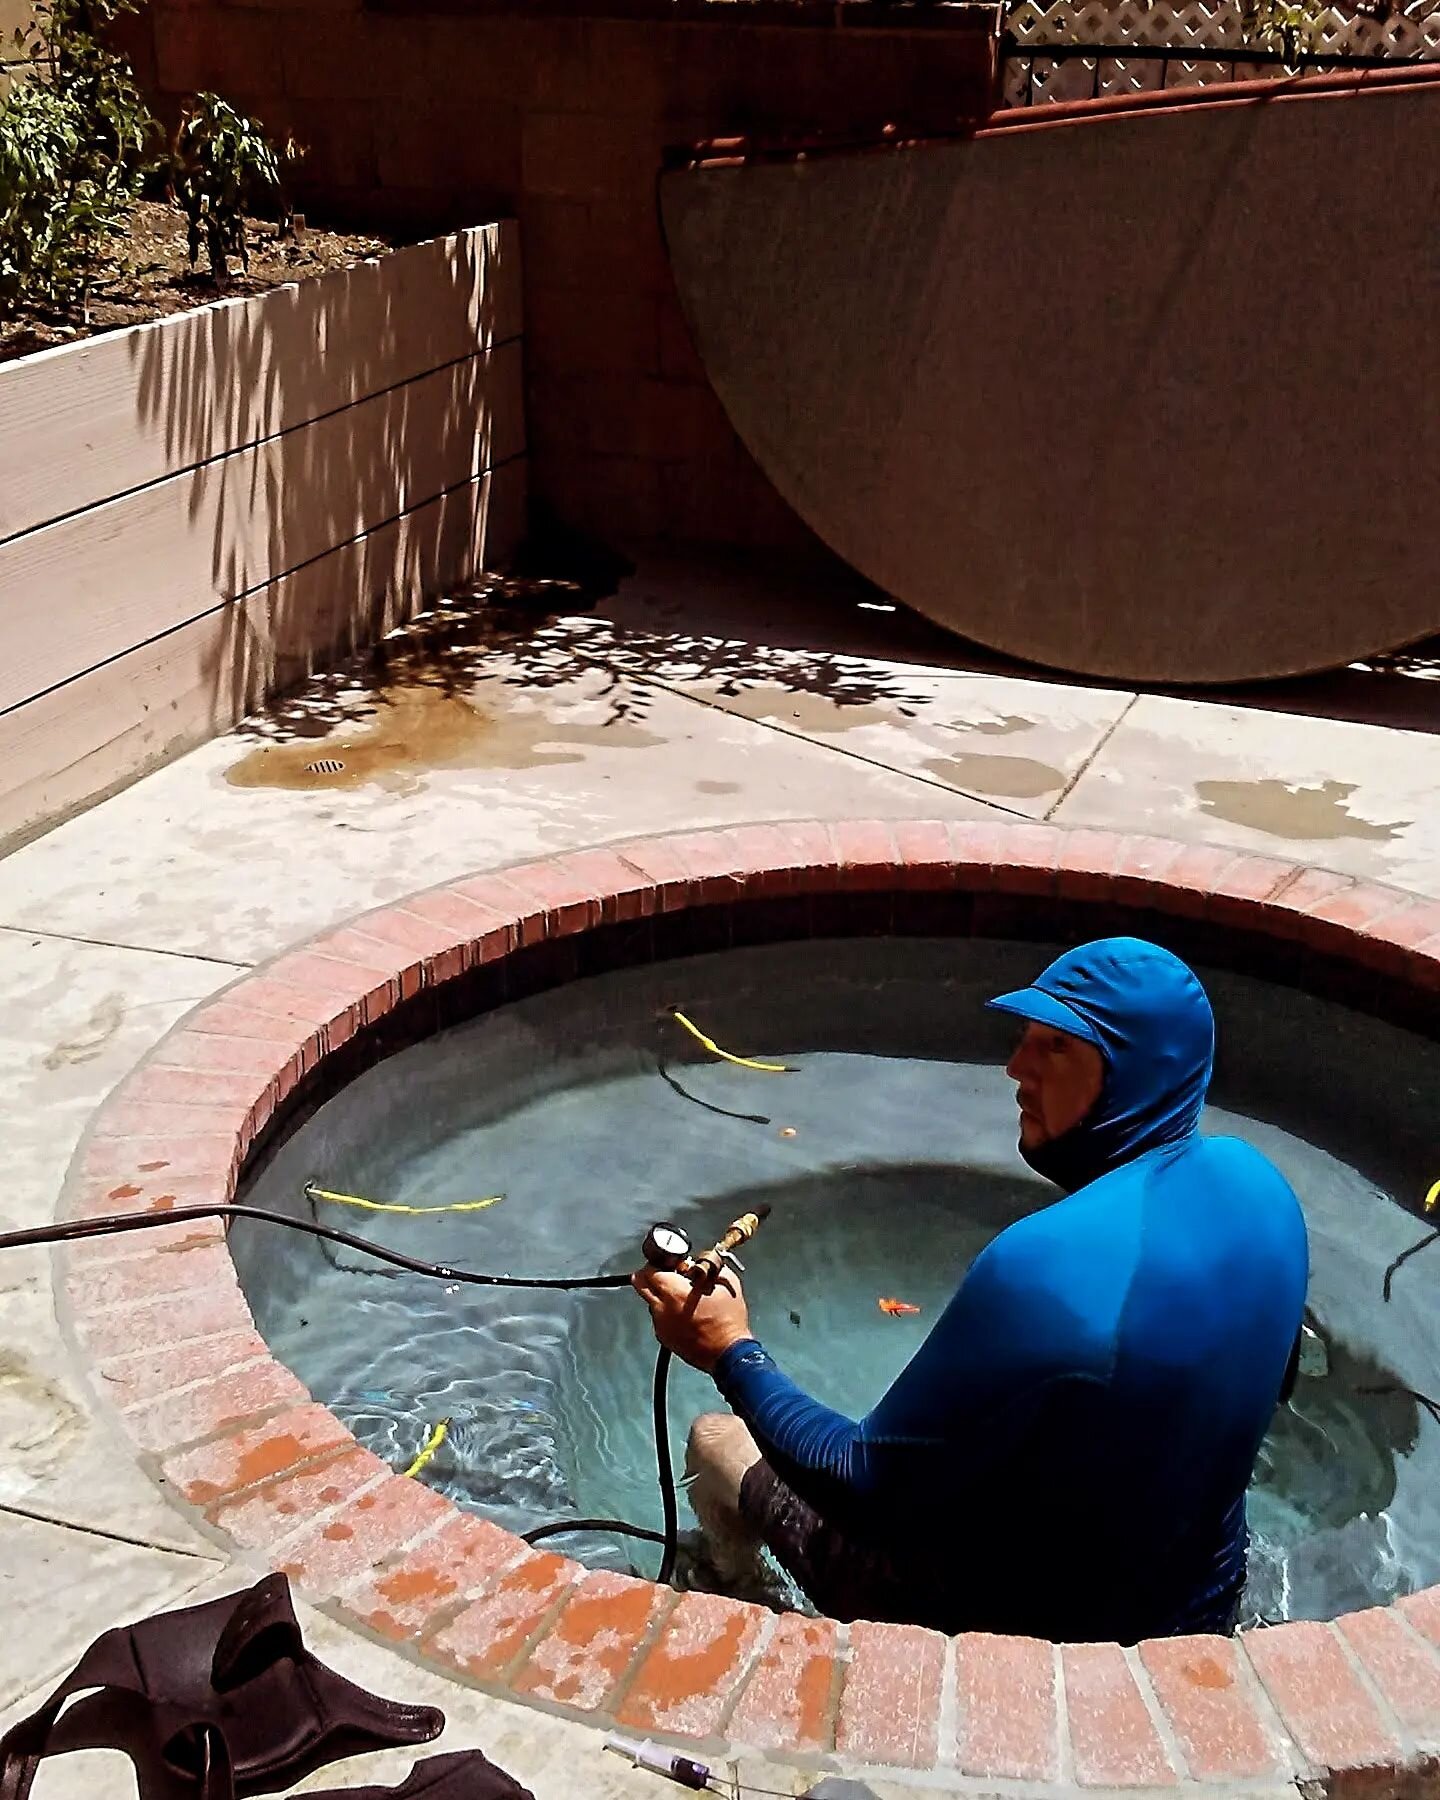 Pool leak detection performed by Aquaman Leak Detection of Southern California. Capable to stop leaks and stop wasting water today 🛑 💦🌴

#poolleakdetection 
#losangeles 
#southerncalifornia 
#youtubechannel